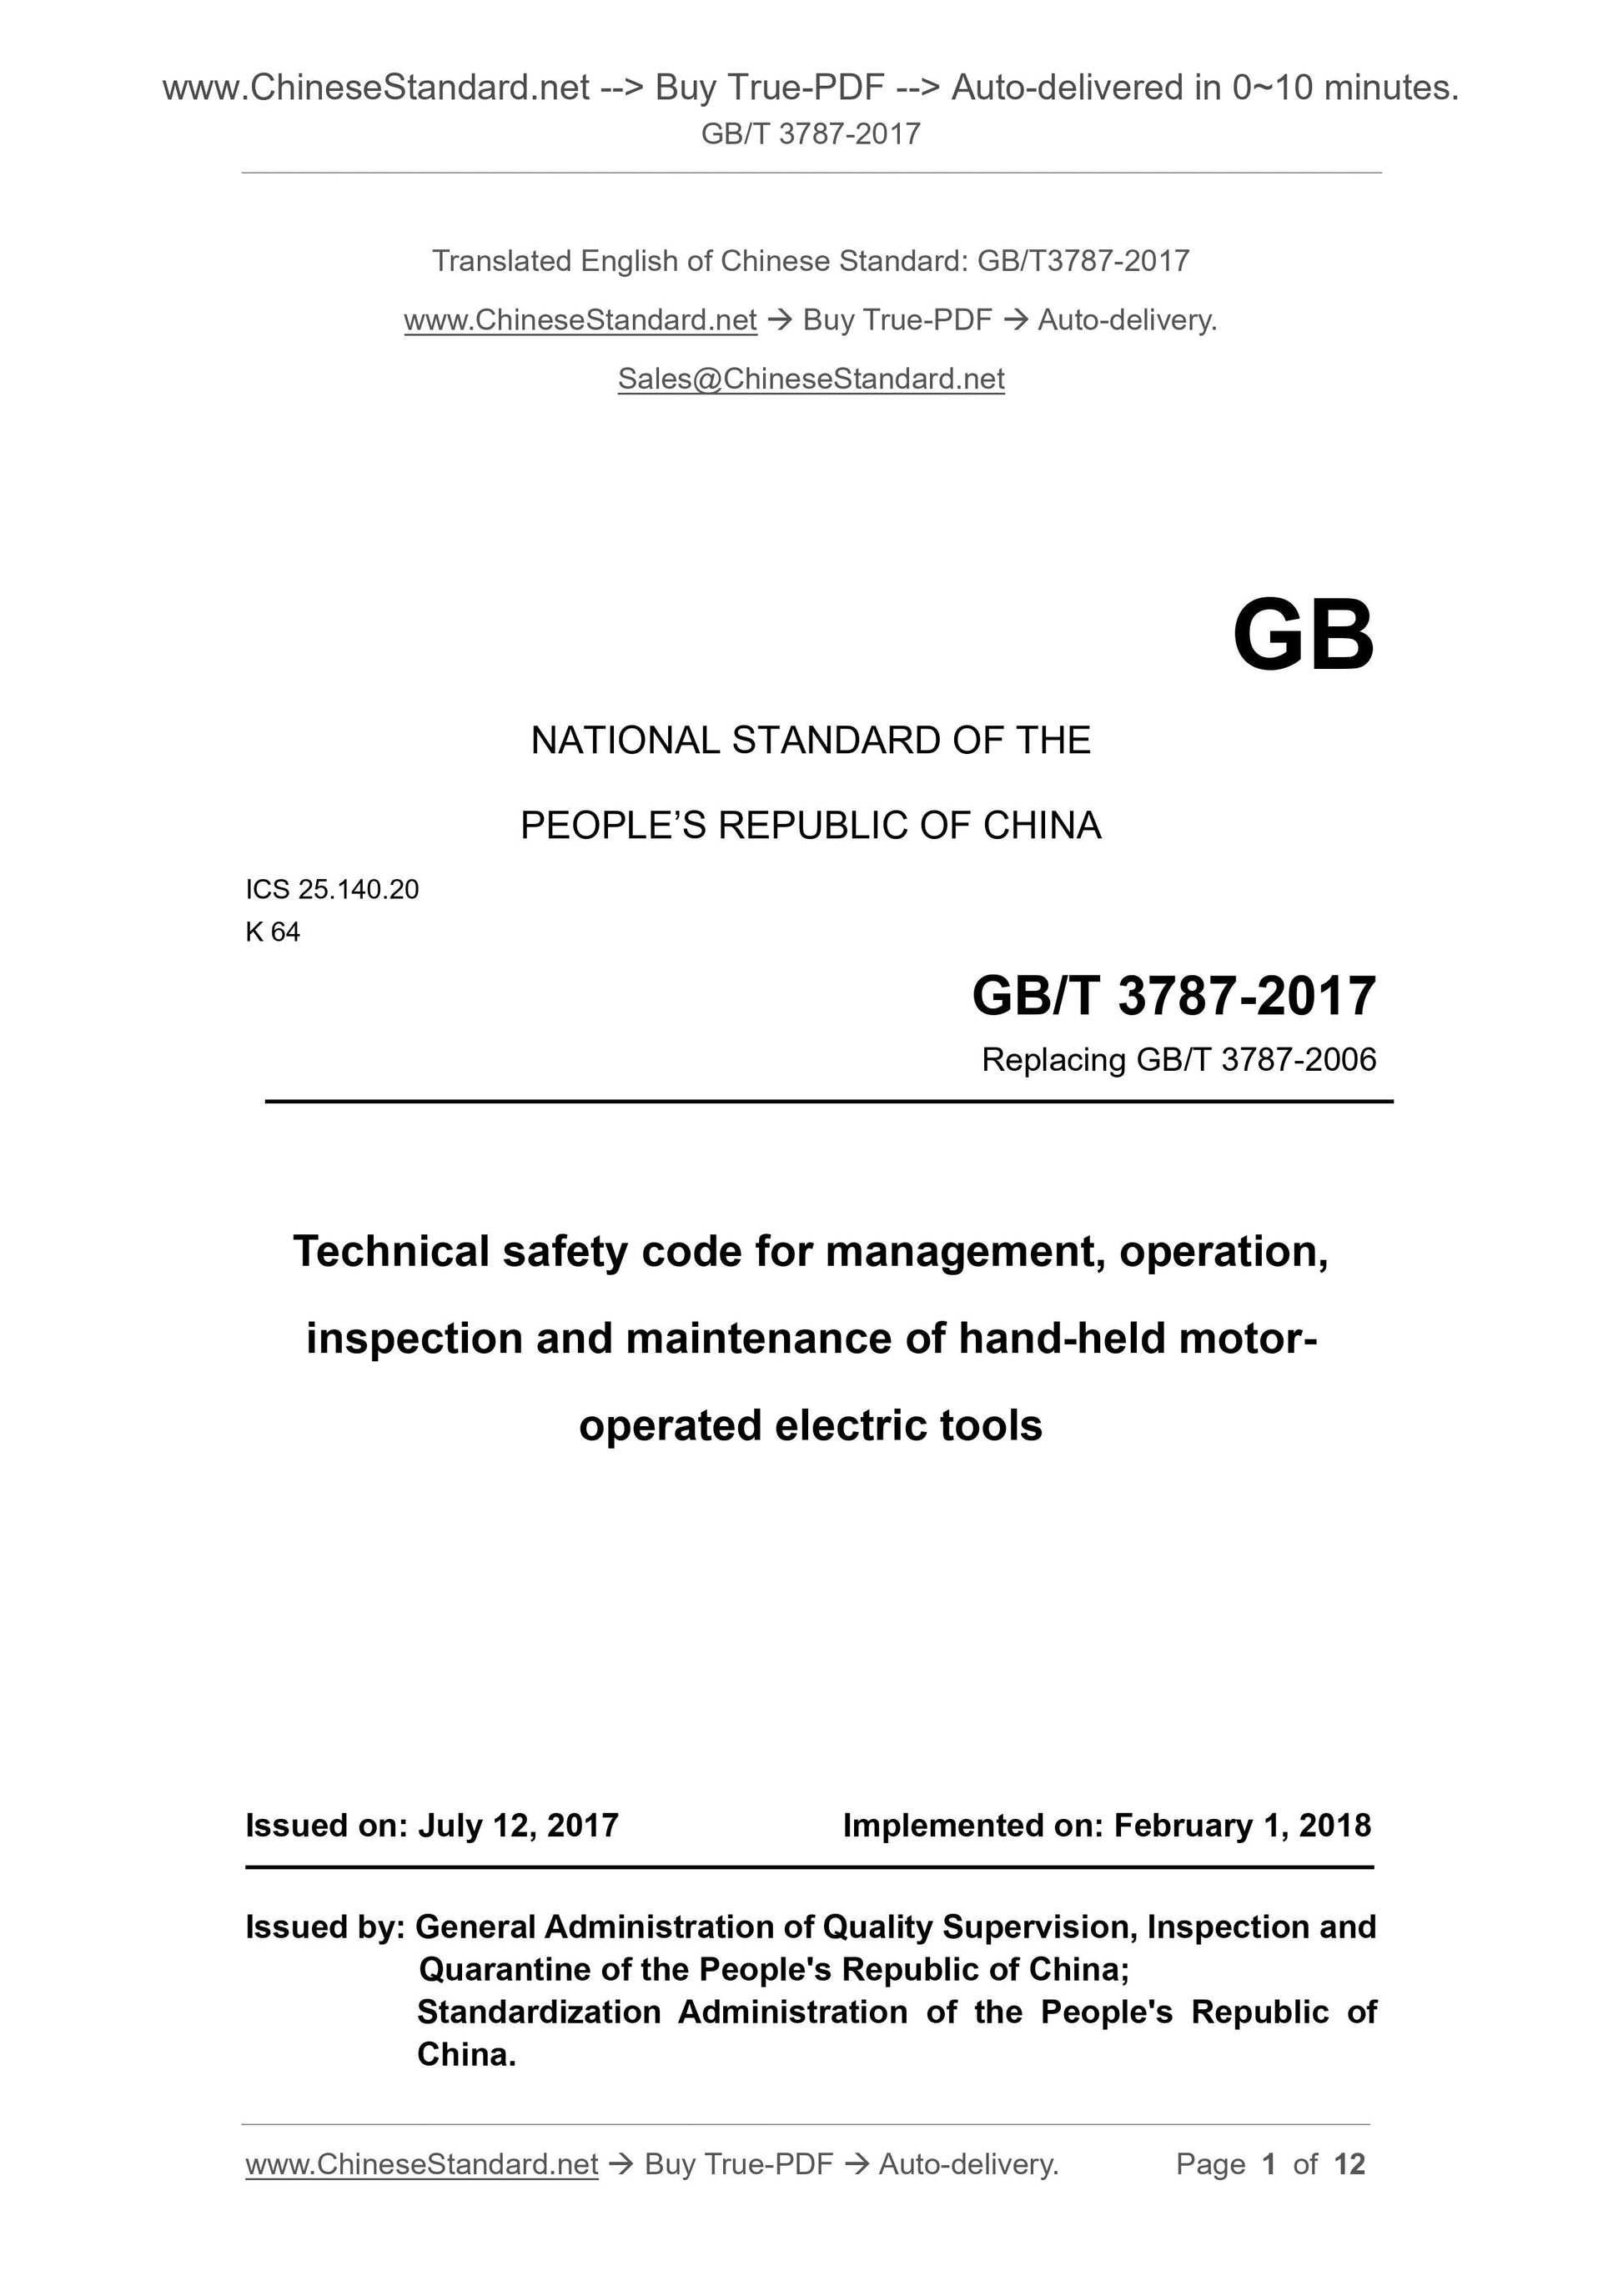 GB/T 3787-2017 Page 1